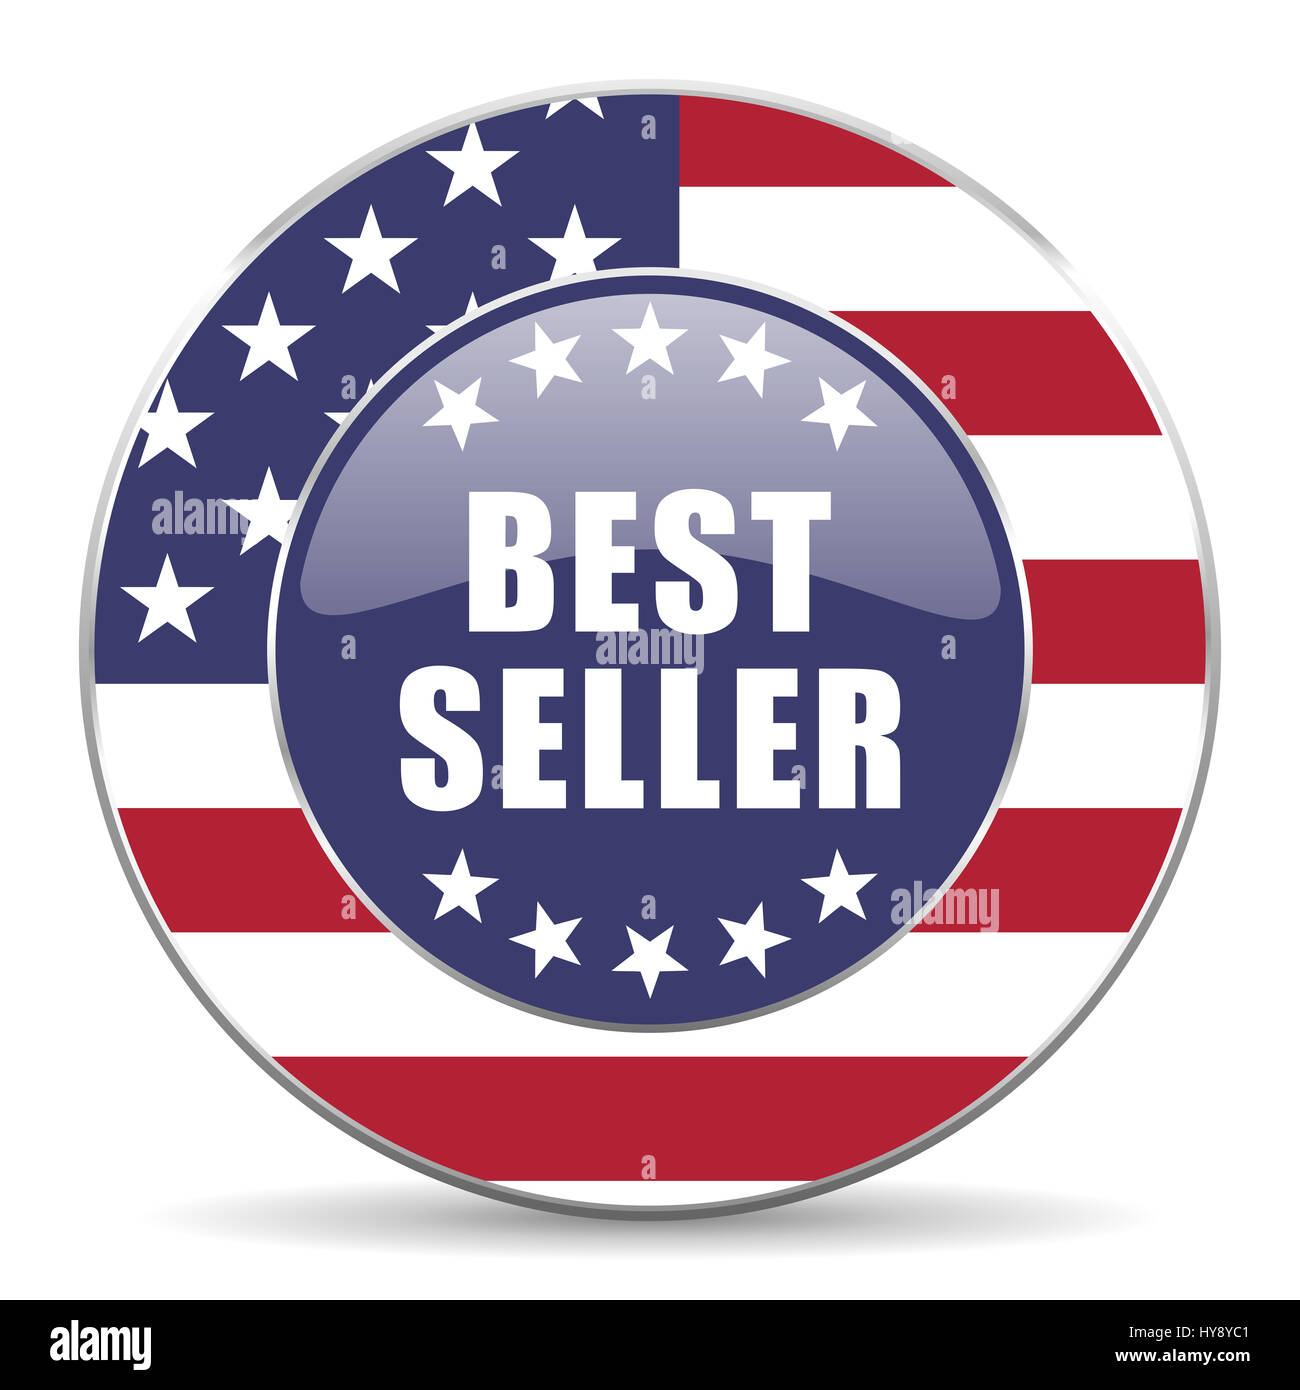 Best seller usa design web american round internet icon with shadow on white background. Stock Photo